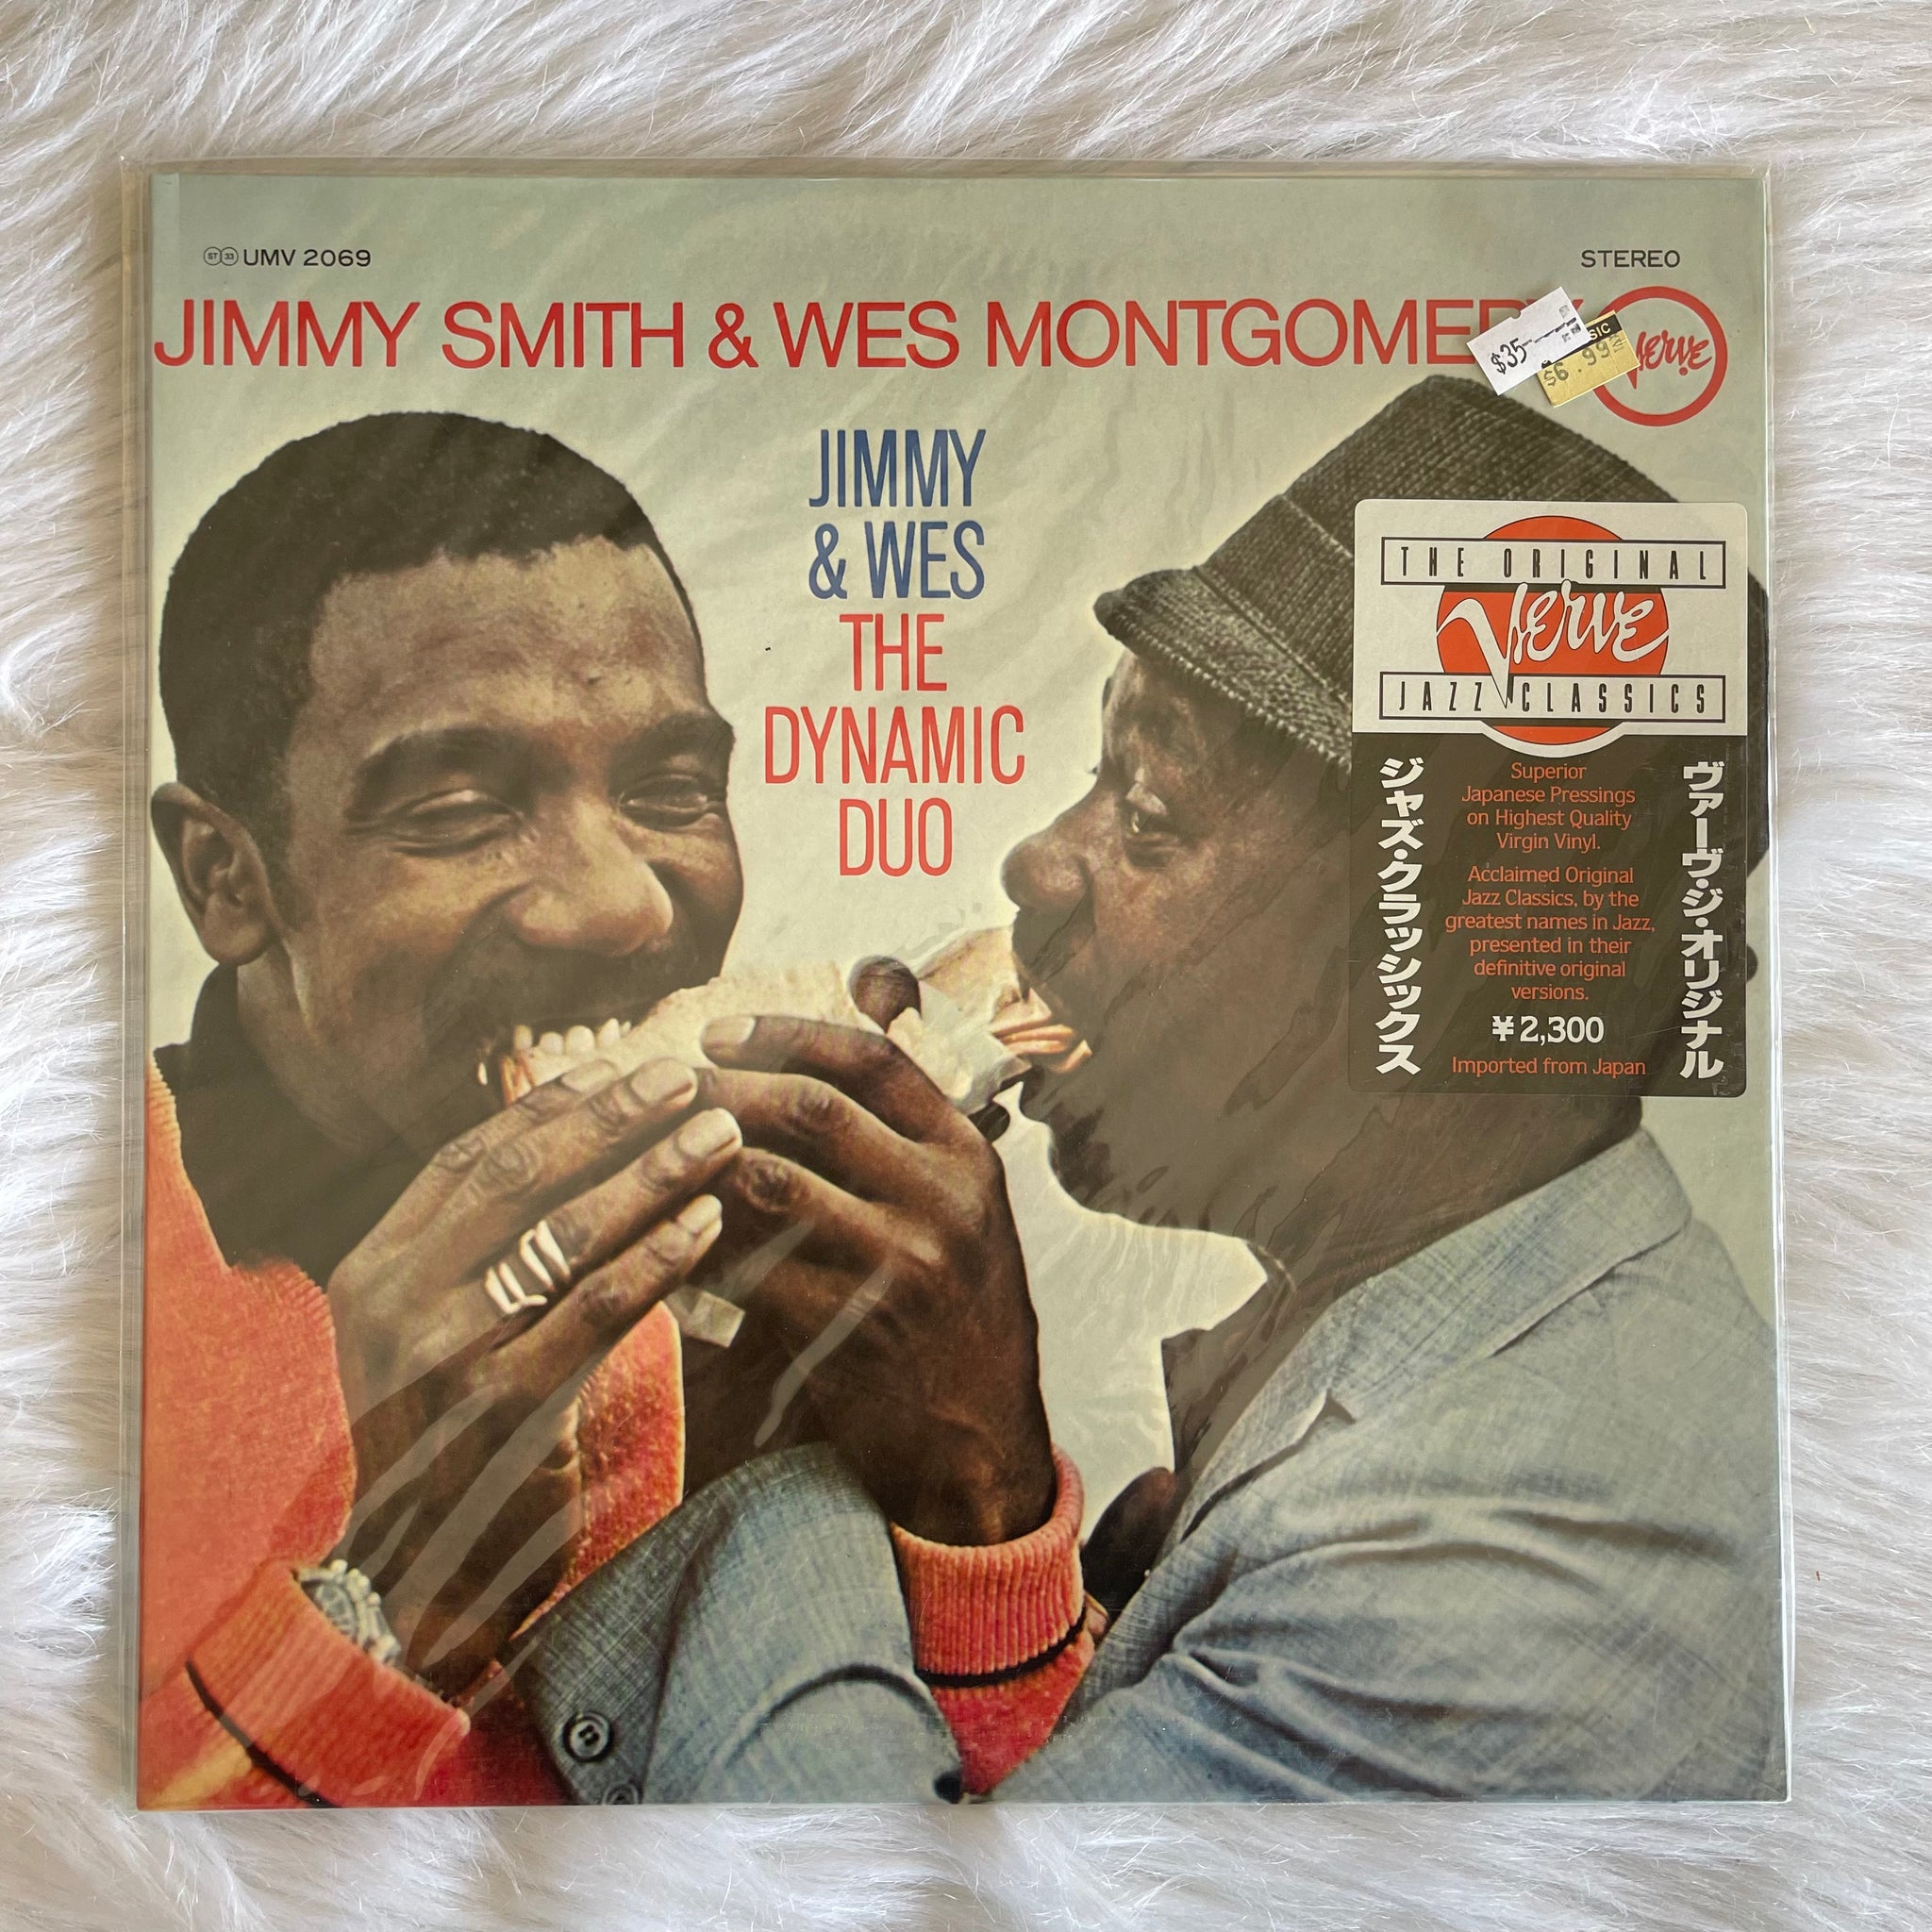 Jimmy Smith & Wes Montgomery-Jimmy and Wes the Dynamic Duo